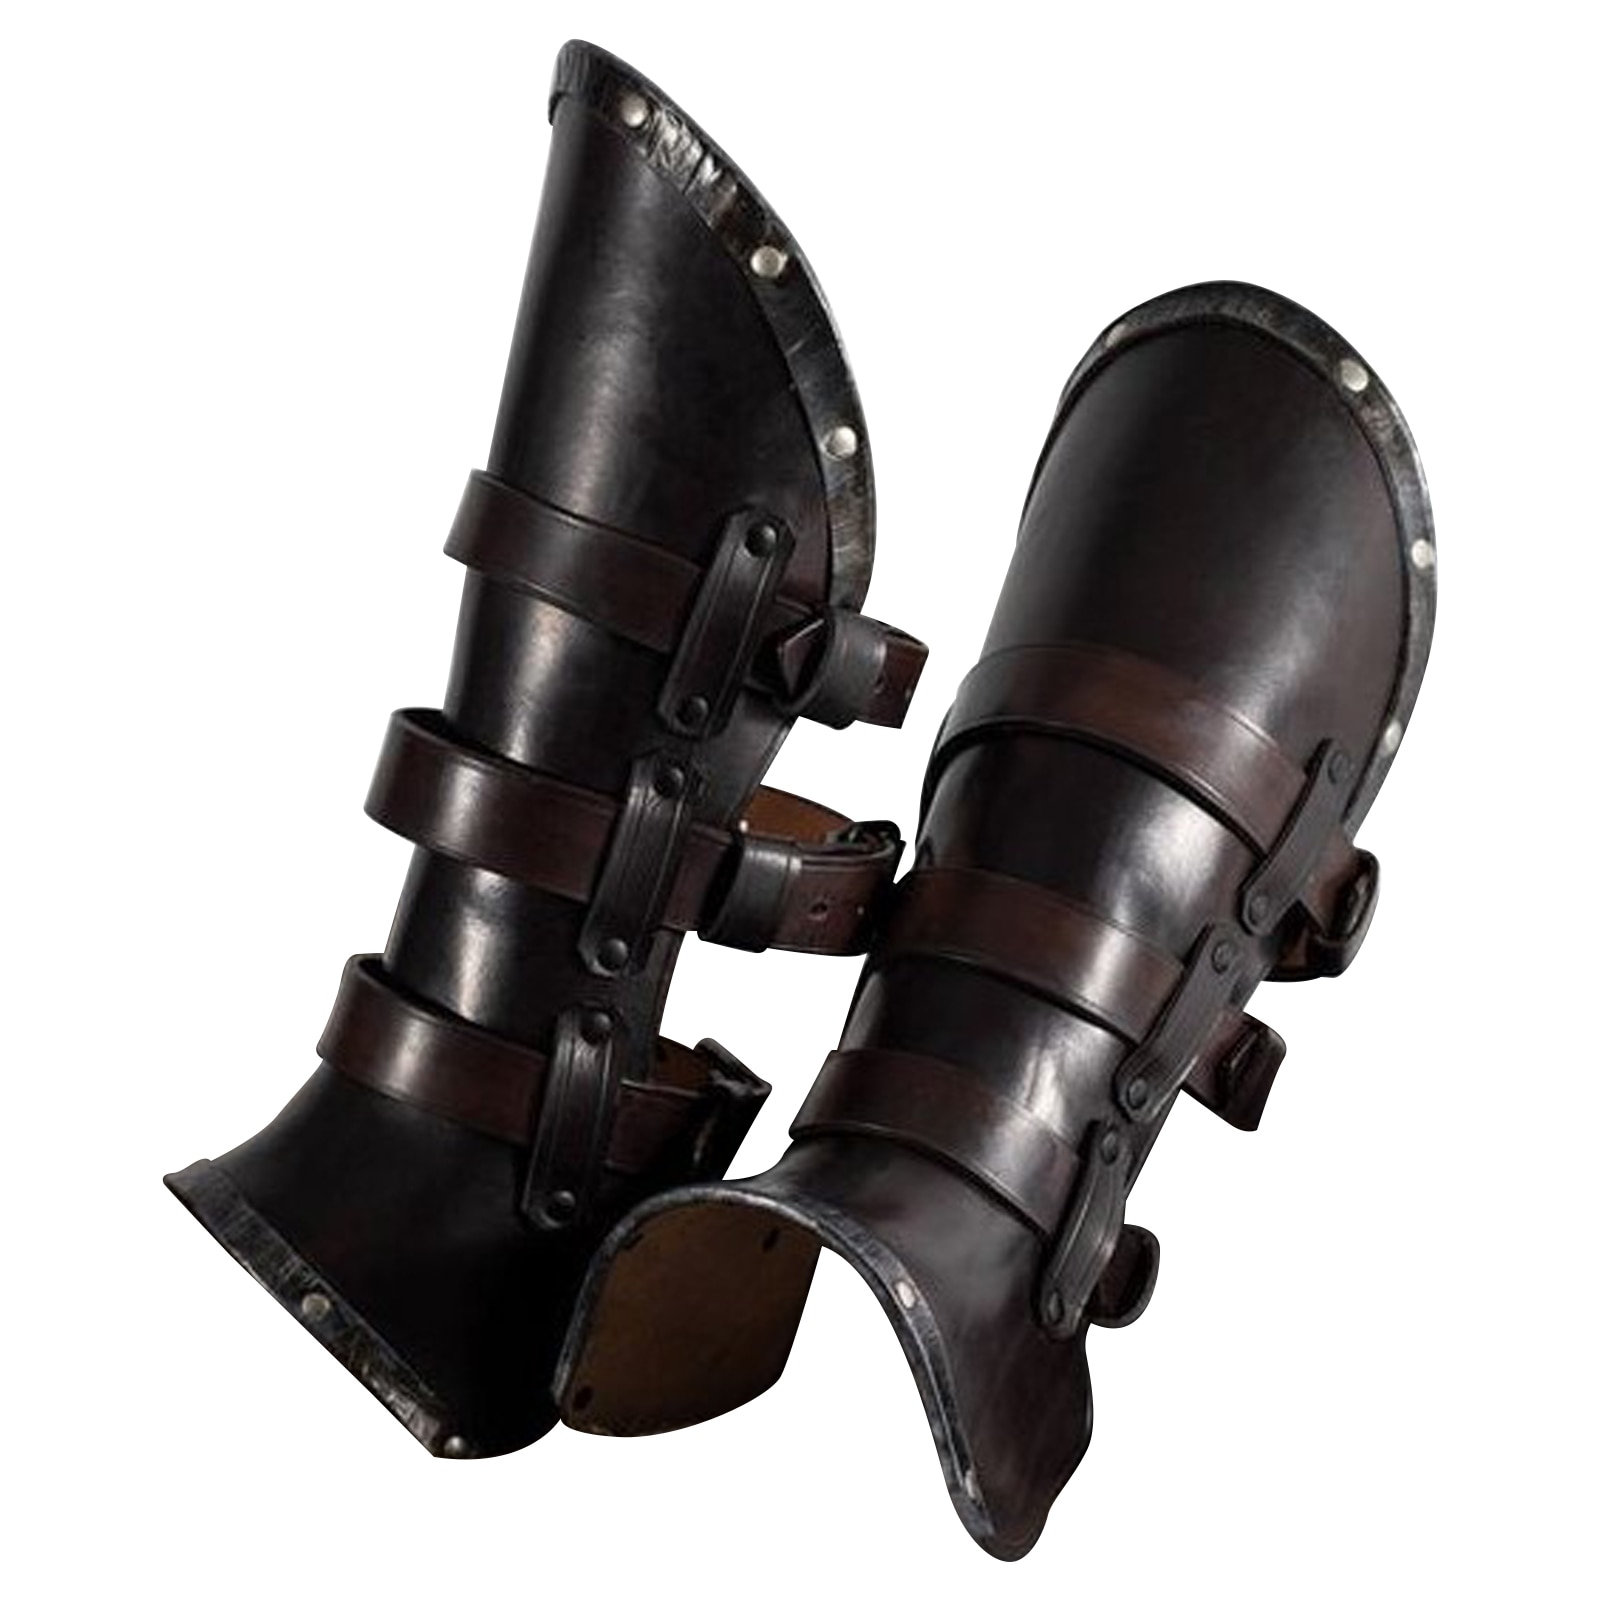 Medieval Renaissance Cosplay Halloween Greaves Boots Side Buckle Tie Shoes Cover PU Leg Armor Larp Viking Warrior Knight Costume